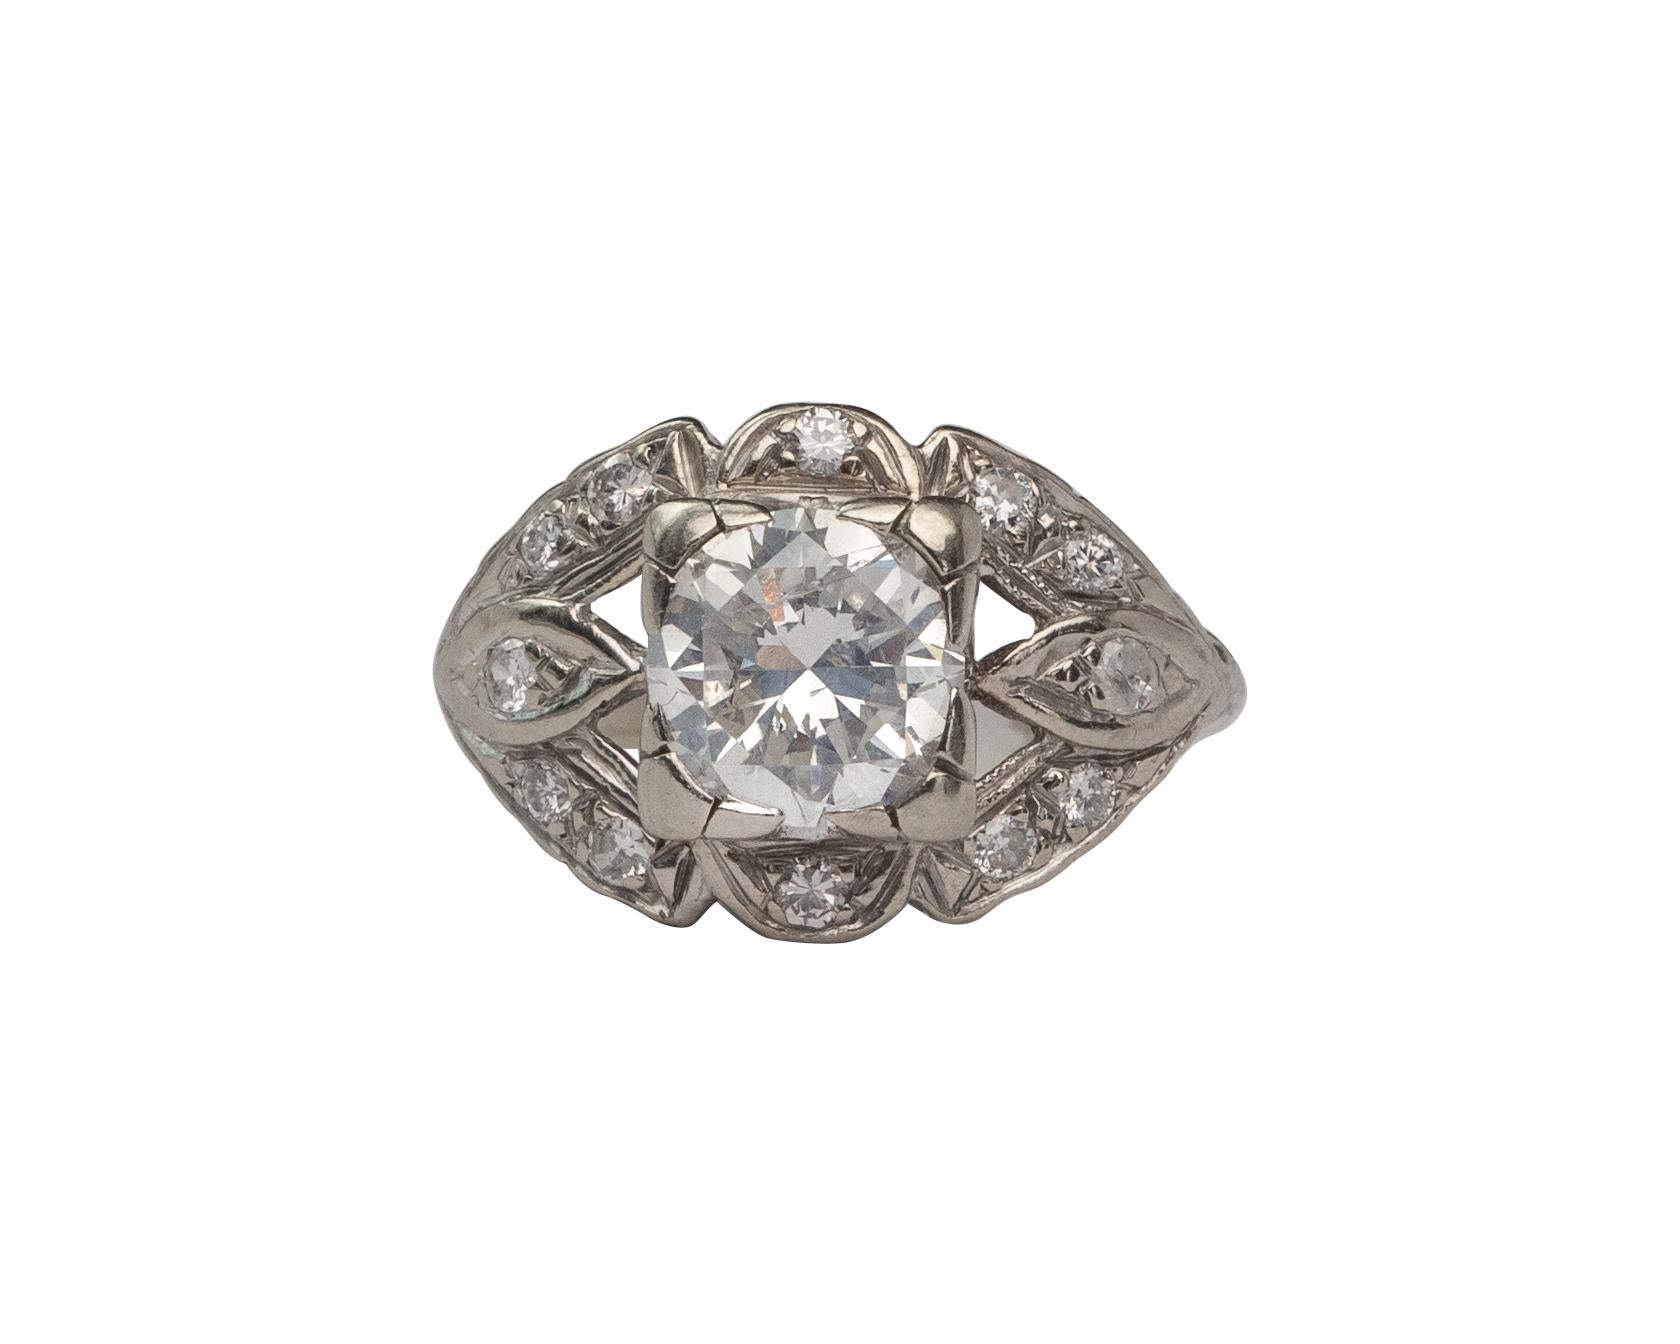 Here we have an beautiful example of an vintage era engagement ring! This genuine 1940's ring features a lovely 1.52 carat 